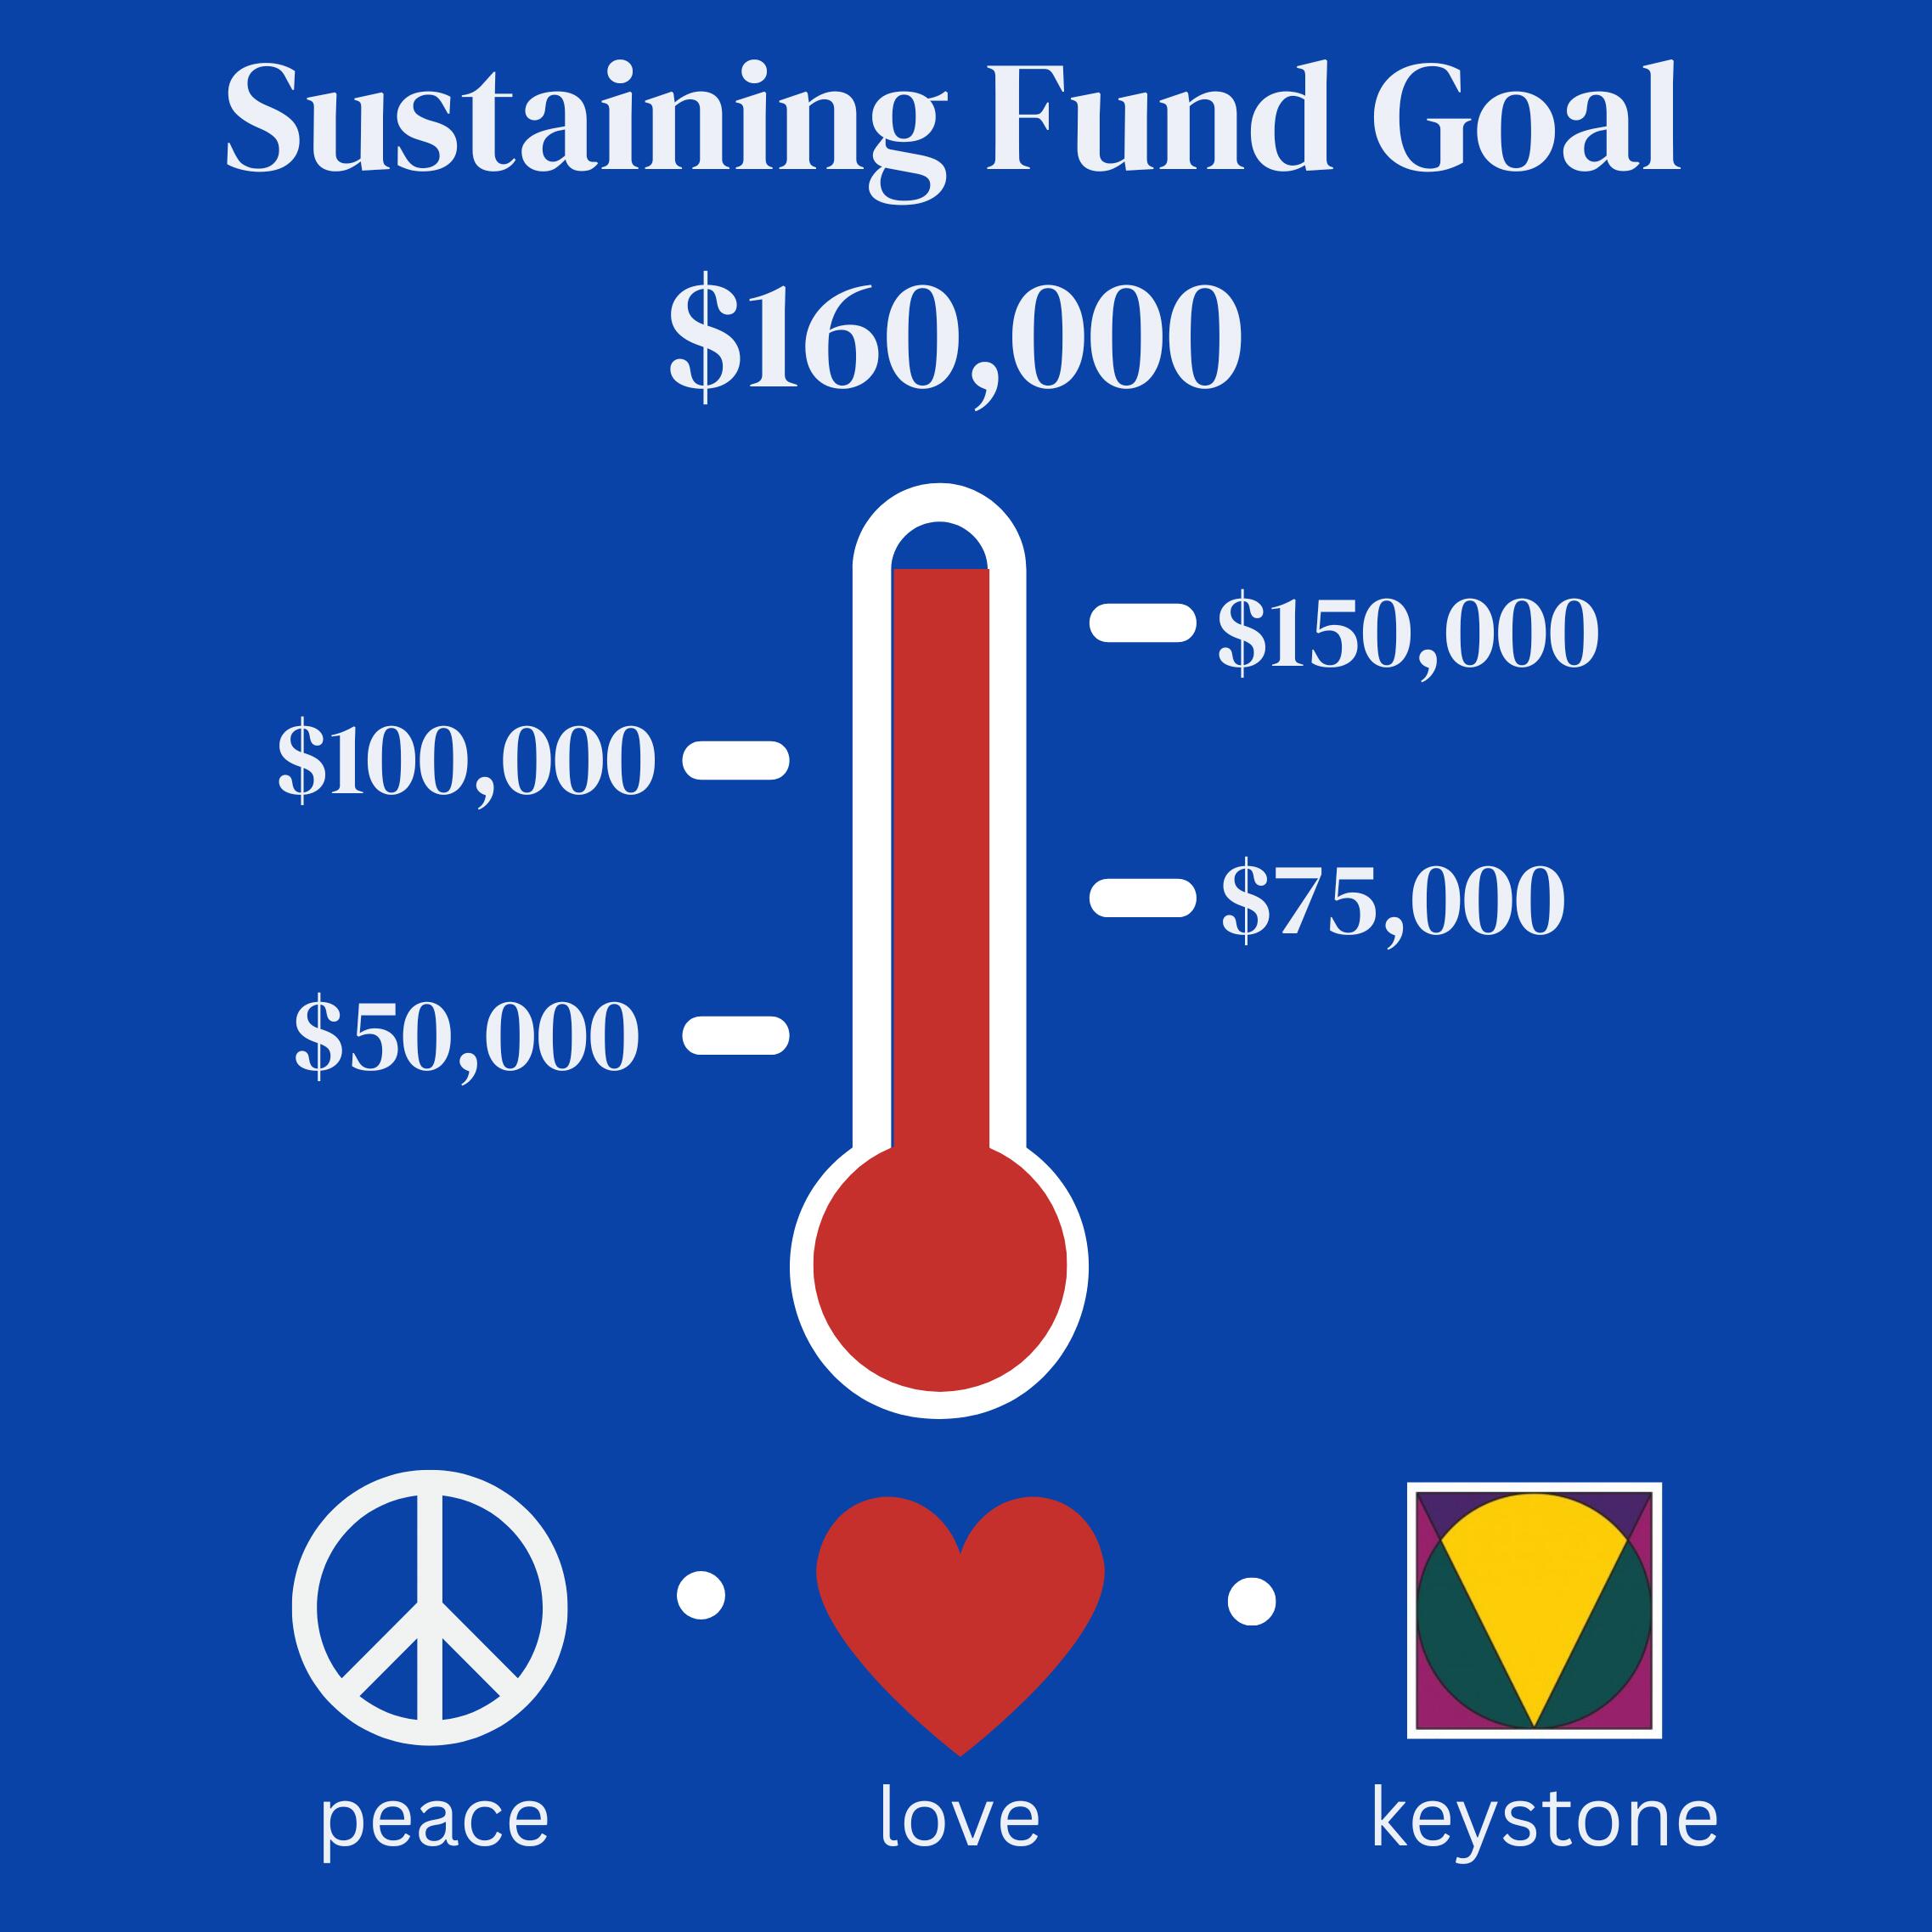 Contribute to the Sustaining Fund